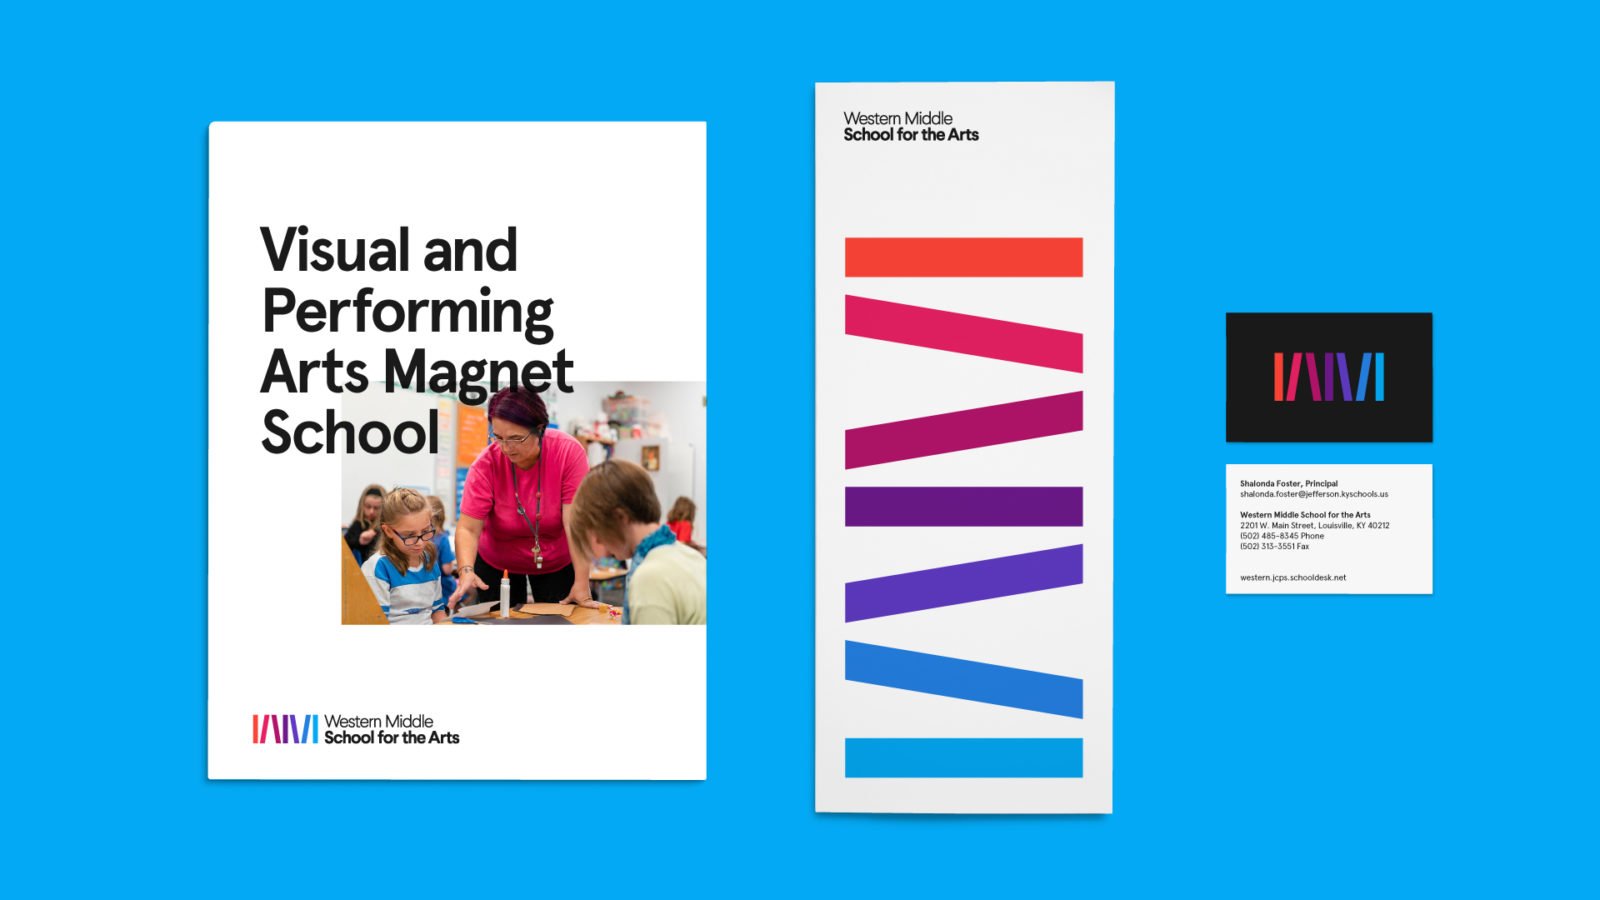 Stationery designs for Western Middle School for the Arts, a Louisville performing arts school